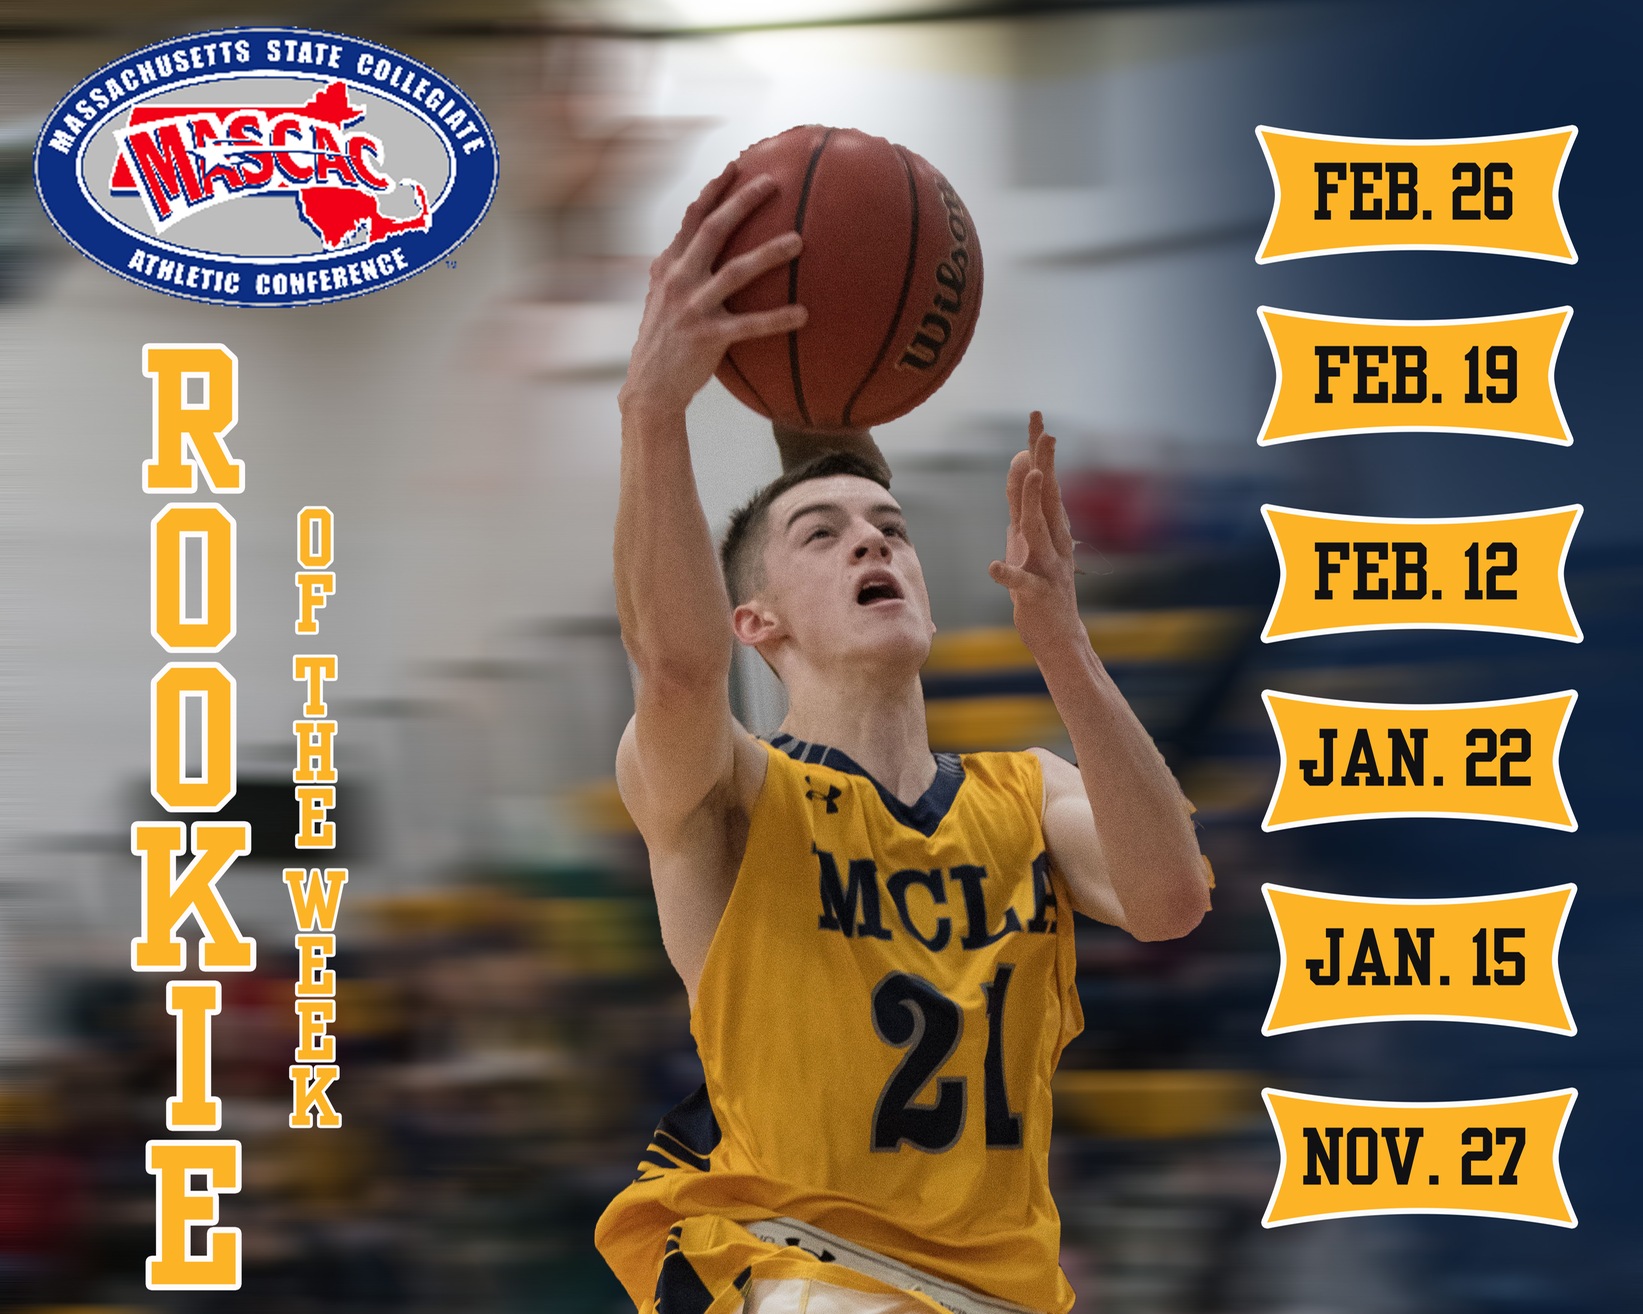 Yearsley's MASCAC tournament performances give him third straight rookie of the week honor